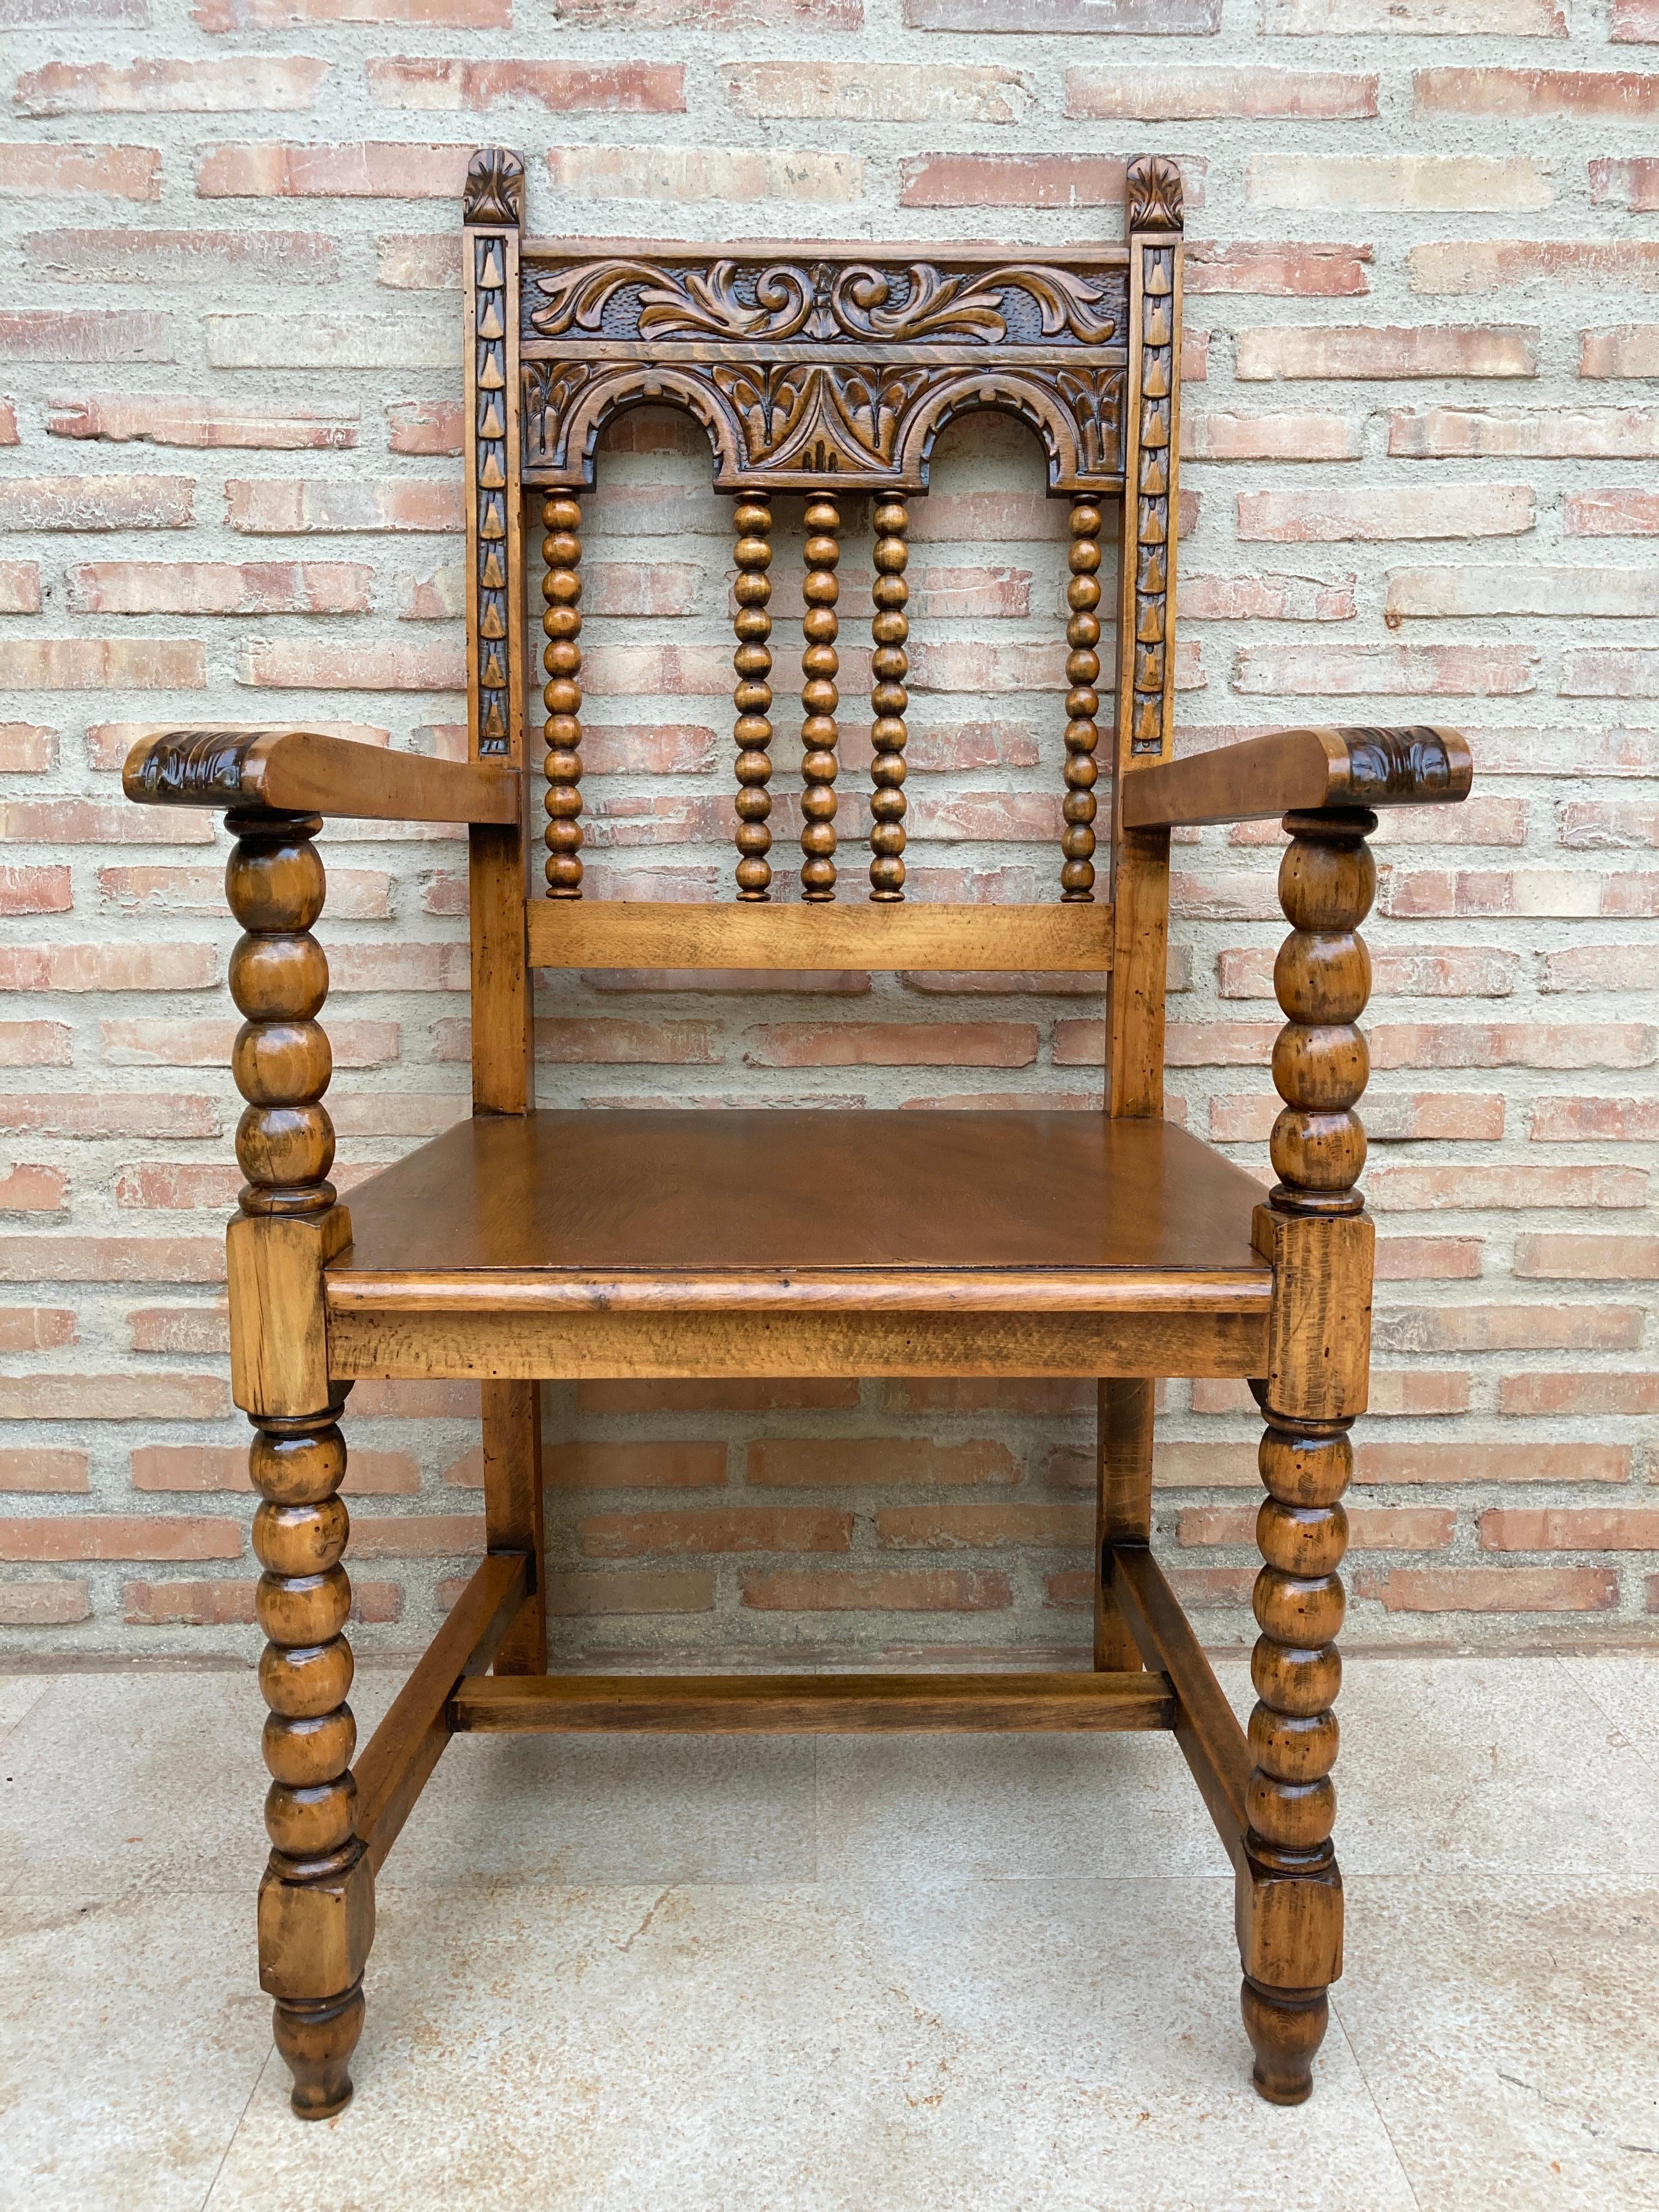 19th Century carved oak turned wood armchair.
Perfect to place in your room or in your office with the table desk together.
The frames with barley twist turning throughout and carved scrolled arms.
The chair back and frames are fully carved with